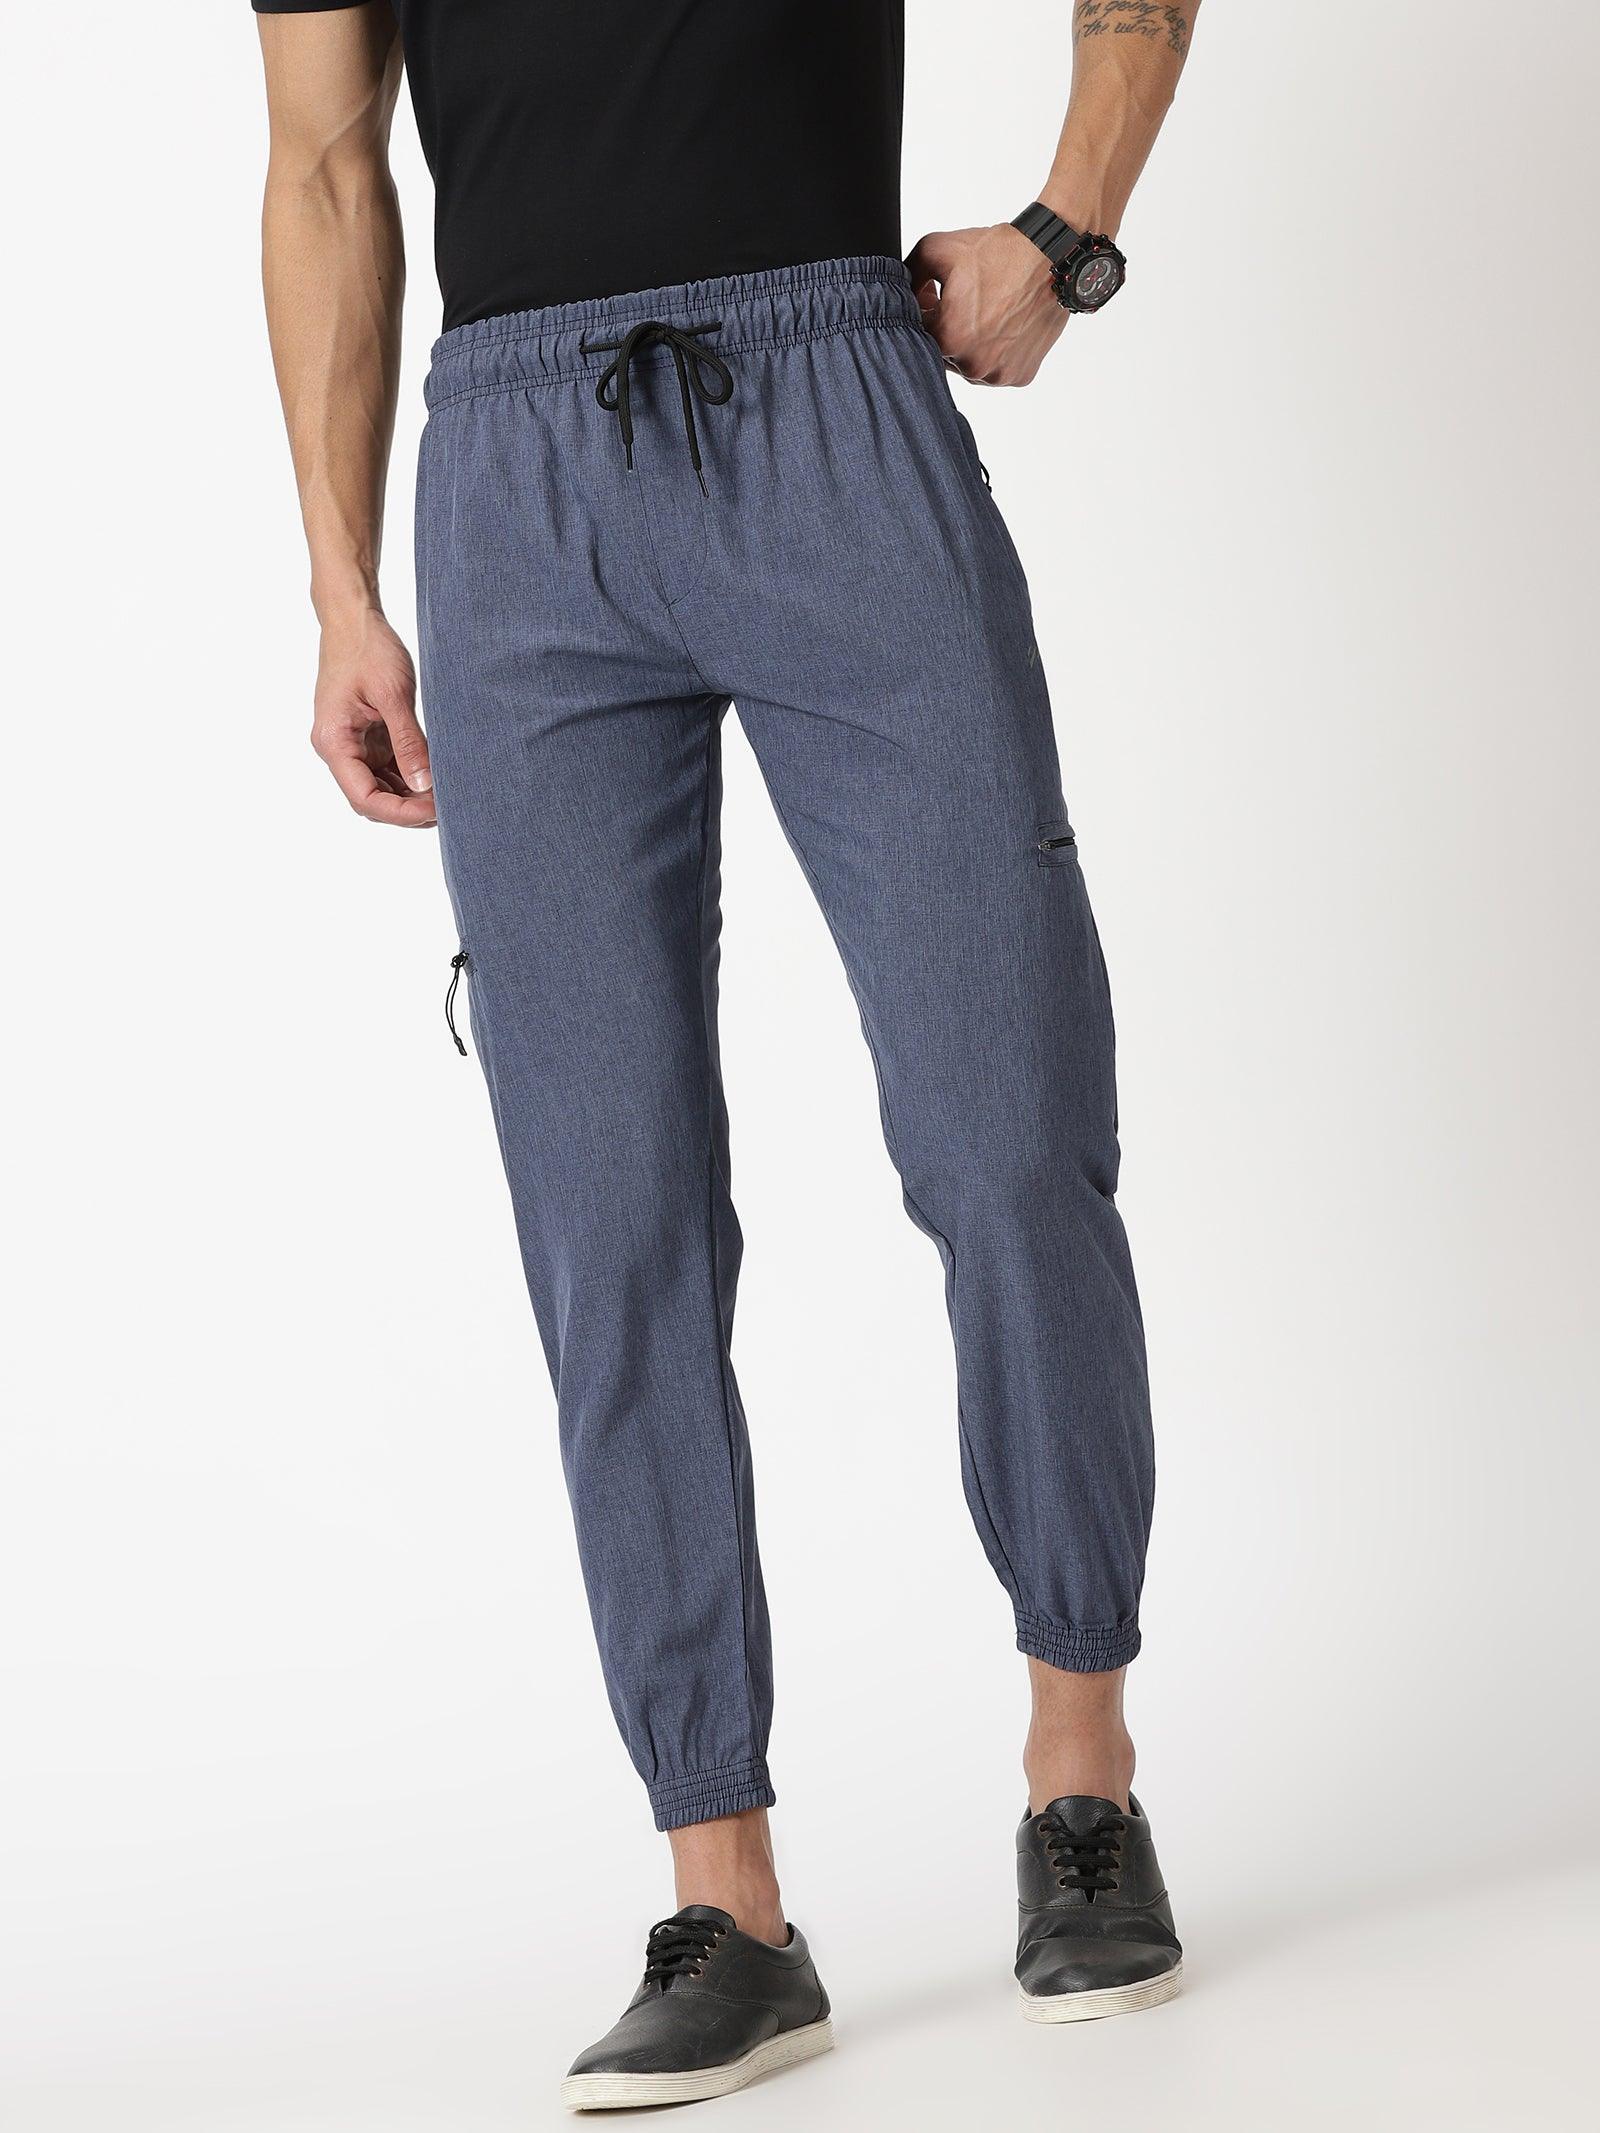 Are jogger pants just the male version of leggings? - Quora